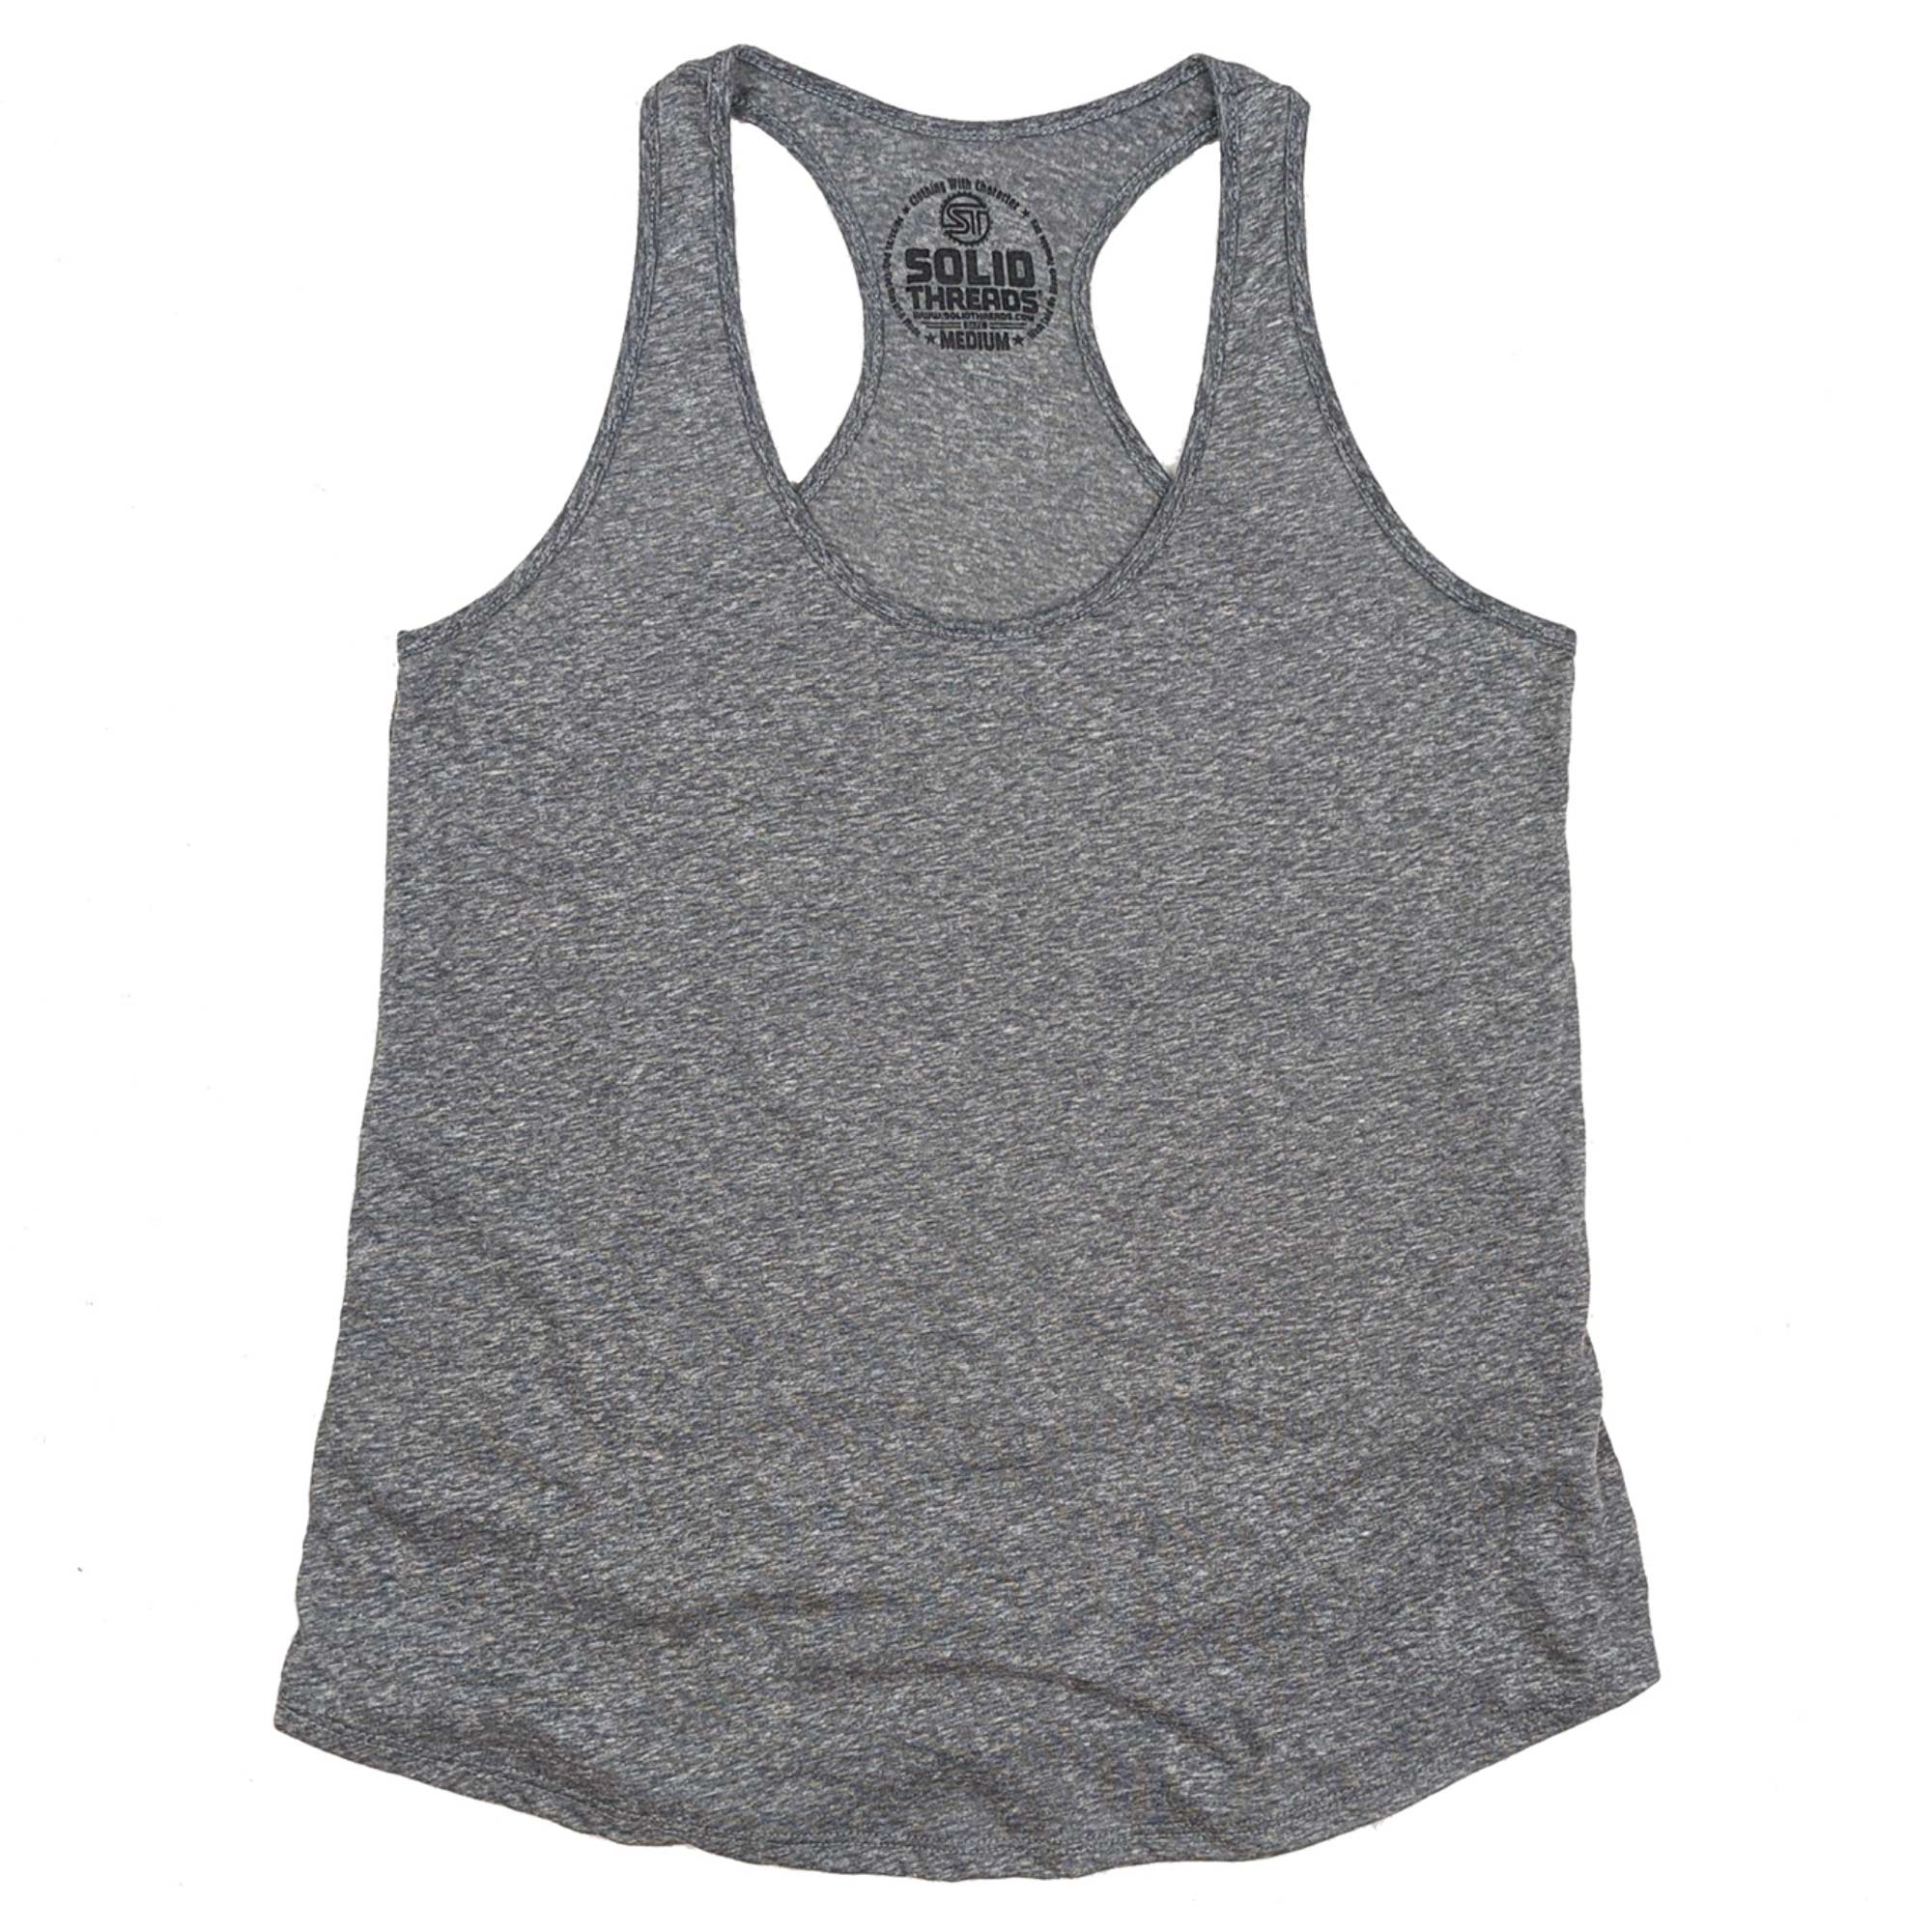 Women's Solid Threads Triblend Grey Tank Top | Vintage Inspired USA Made Tee